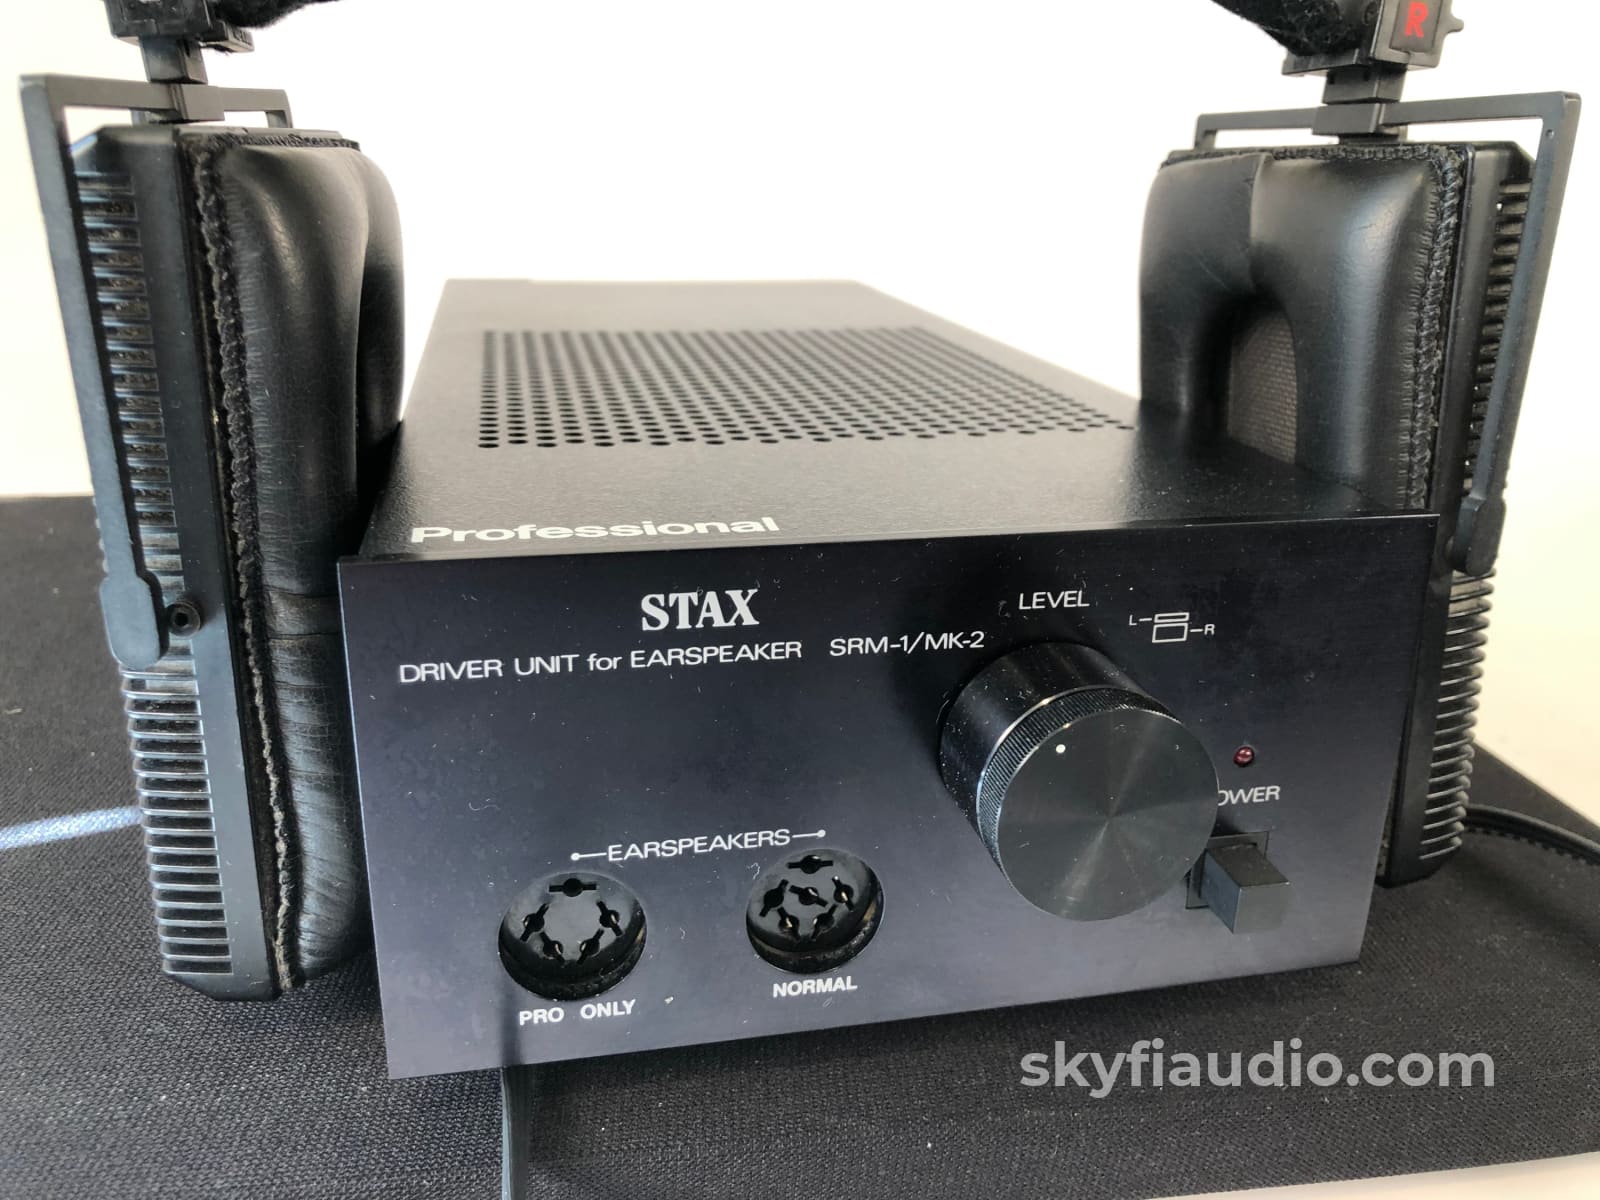 Stax Professional Headphones With Srm-1/Mk-2 Amplifier